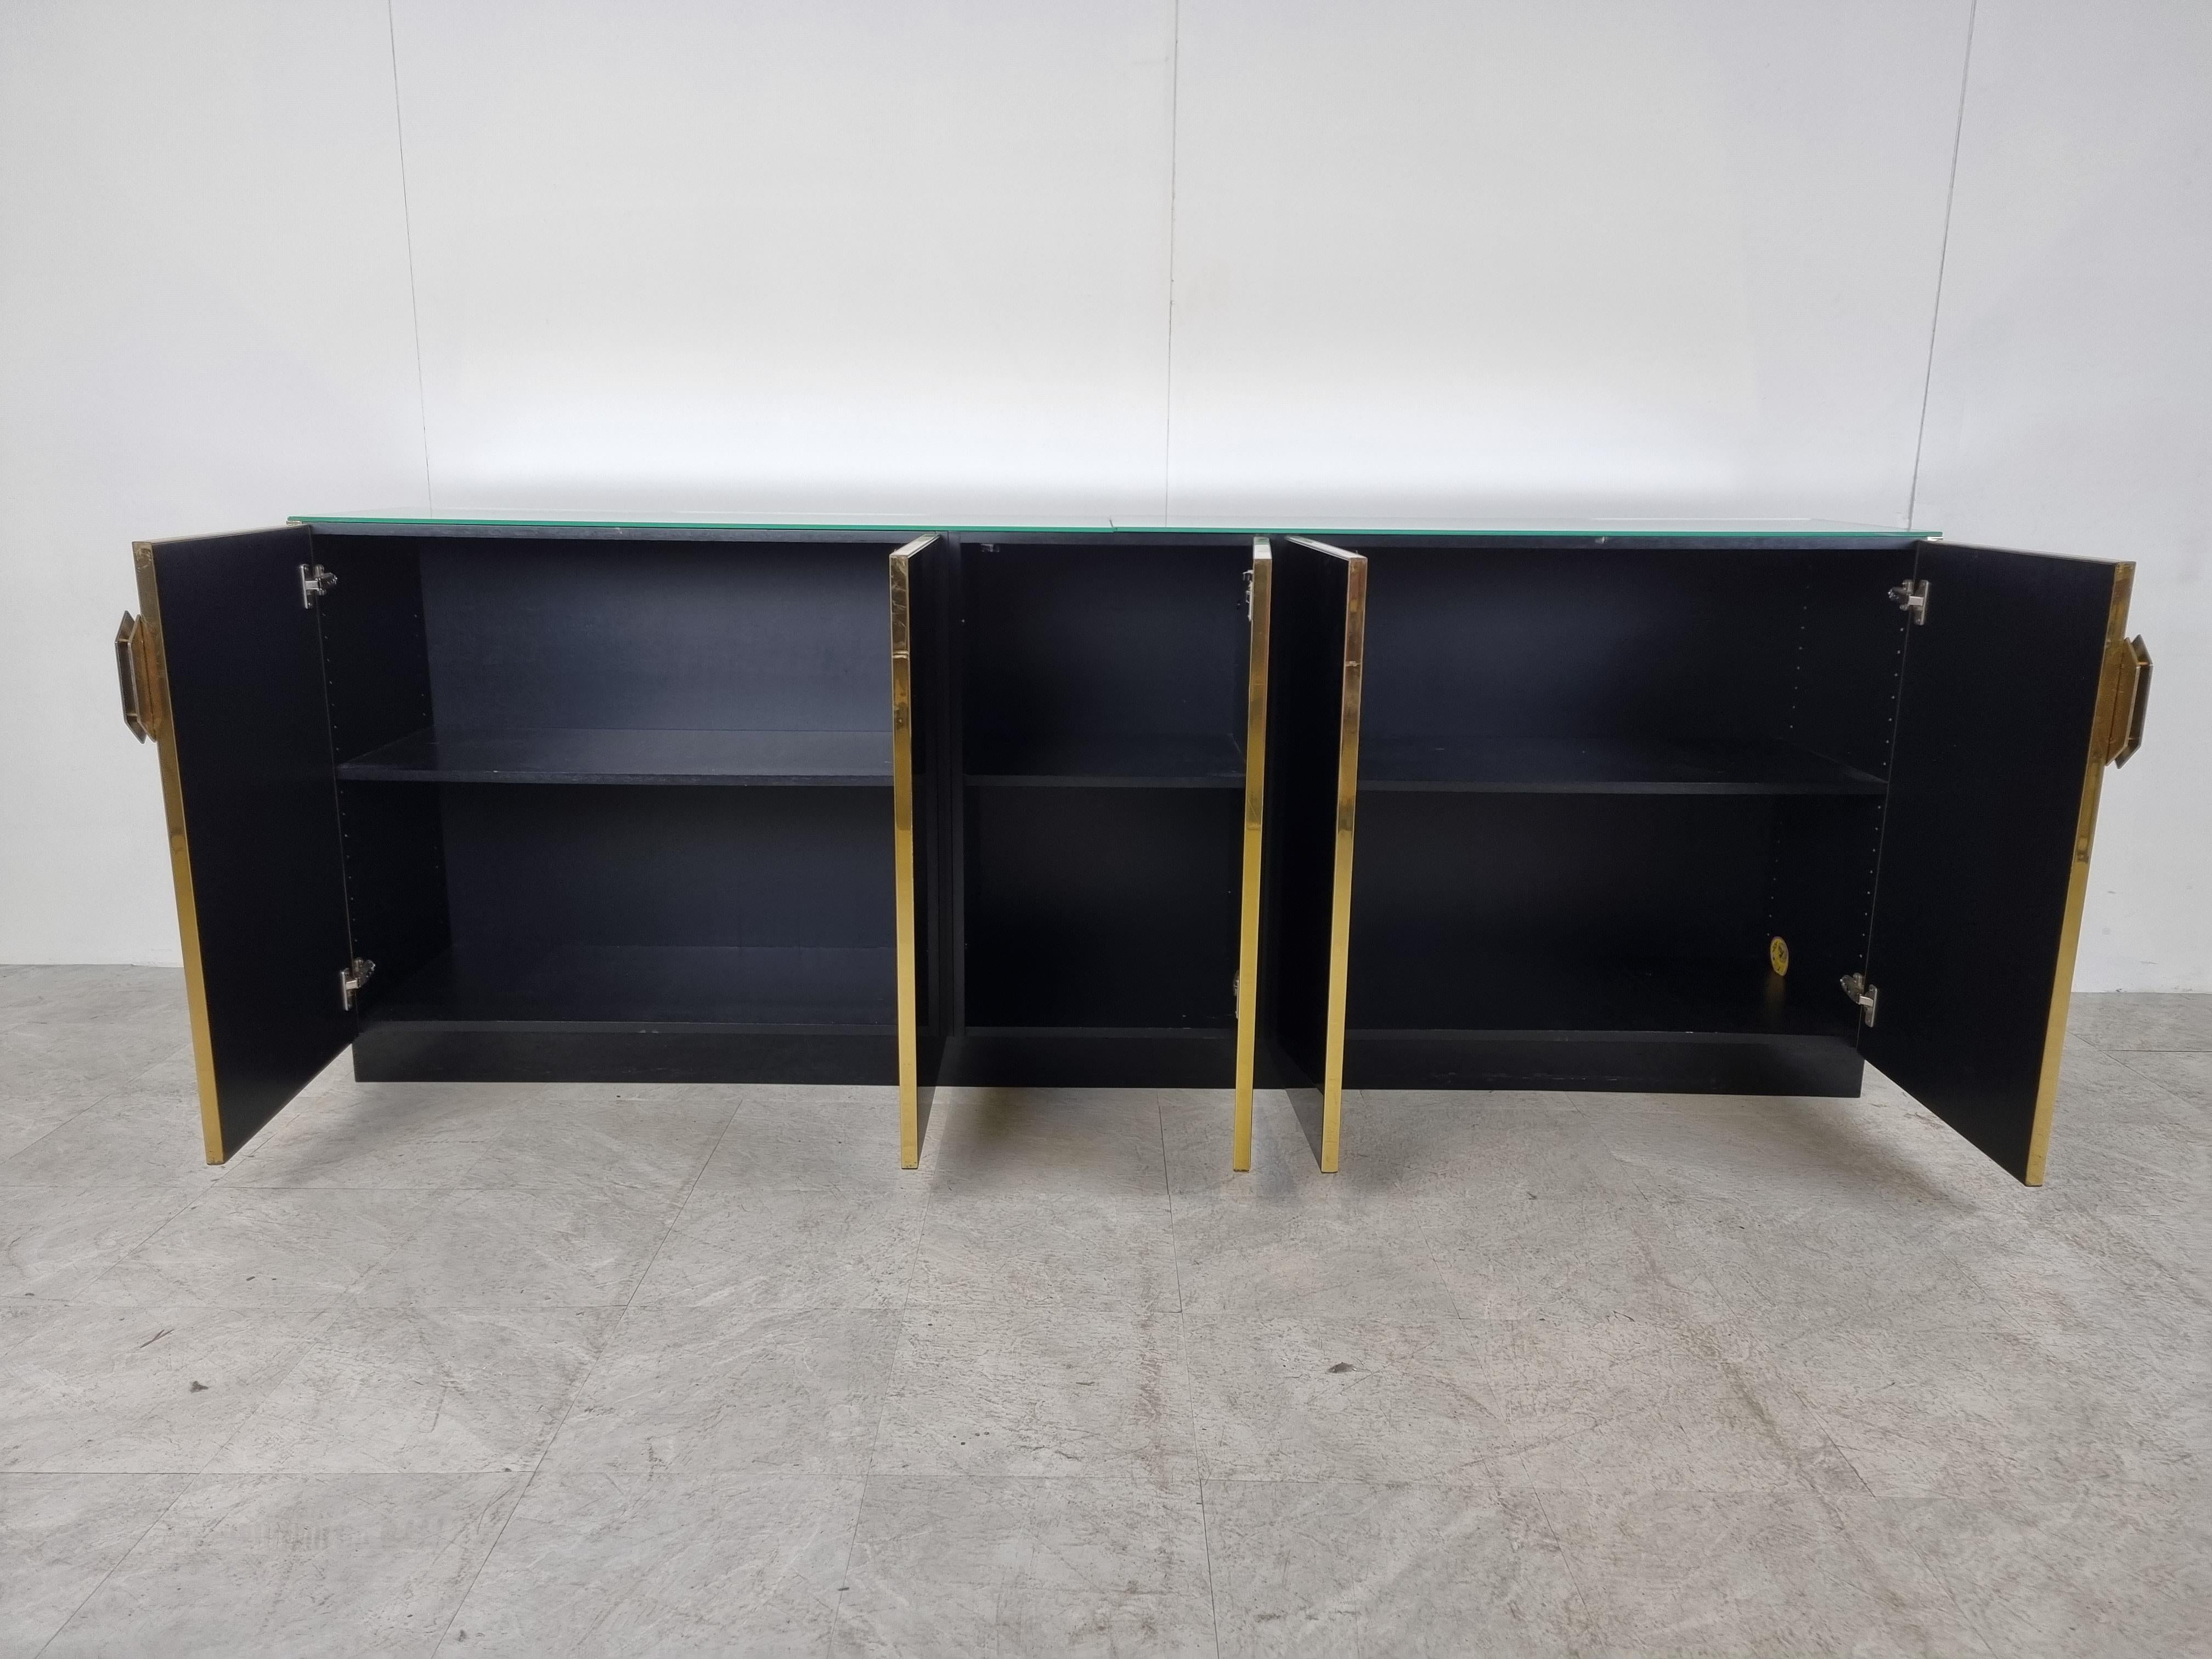 Luxurious seventies glamour sideboard by Maison jansen consitsing of black glass panels, brass handles and a mirrored glass top.

The handles are nicely designed and the mirrored top gives it a an extra touch.

Good condition.

1970s -